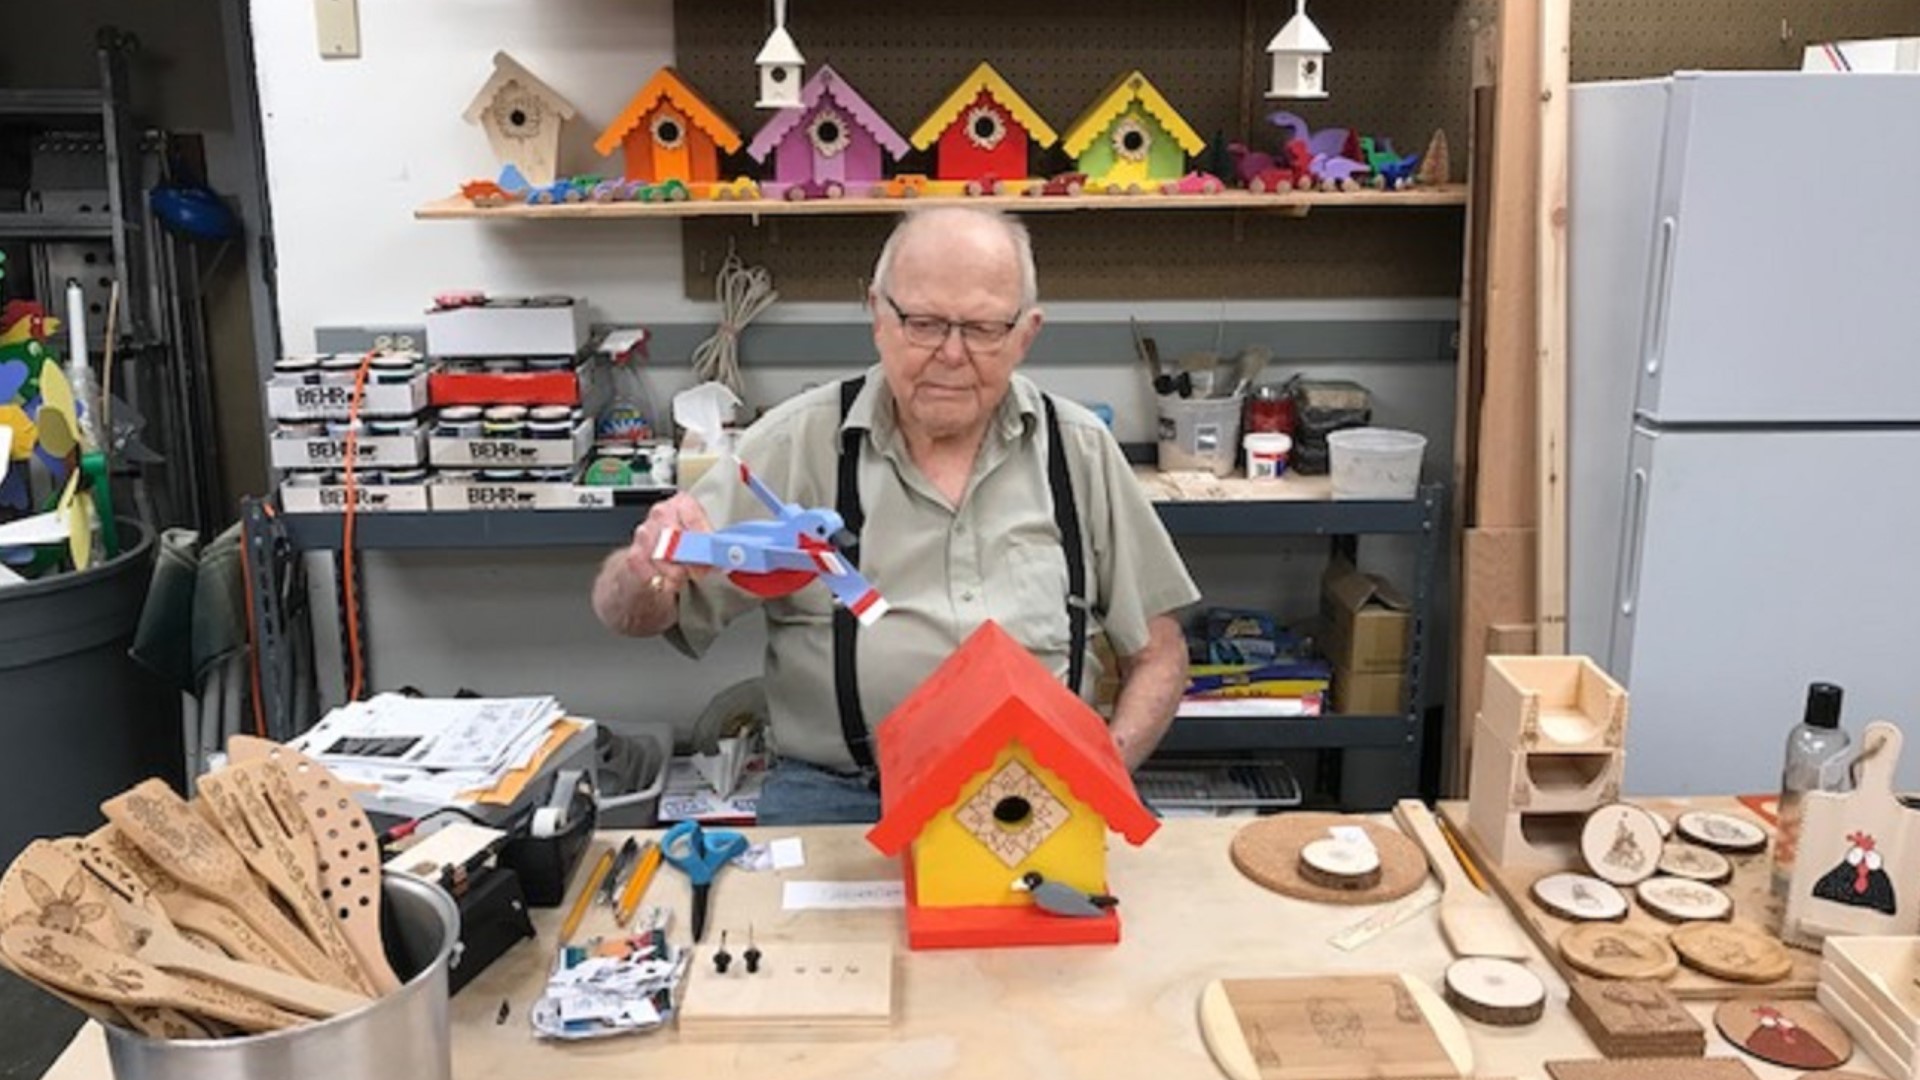 Gregor Terjung was born in 1930 but still spends his days working — creating countless handcrafted wooden toys, garden decorations, and cutting boards. #k5evening